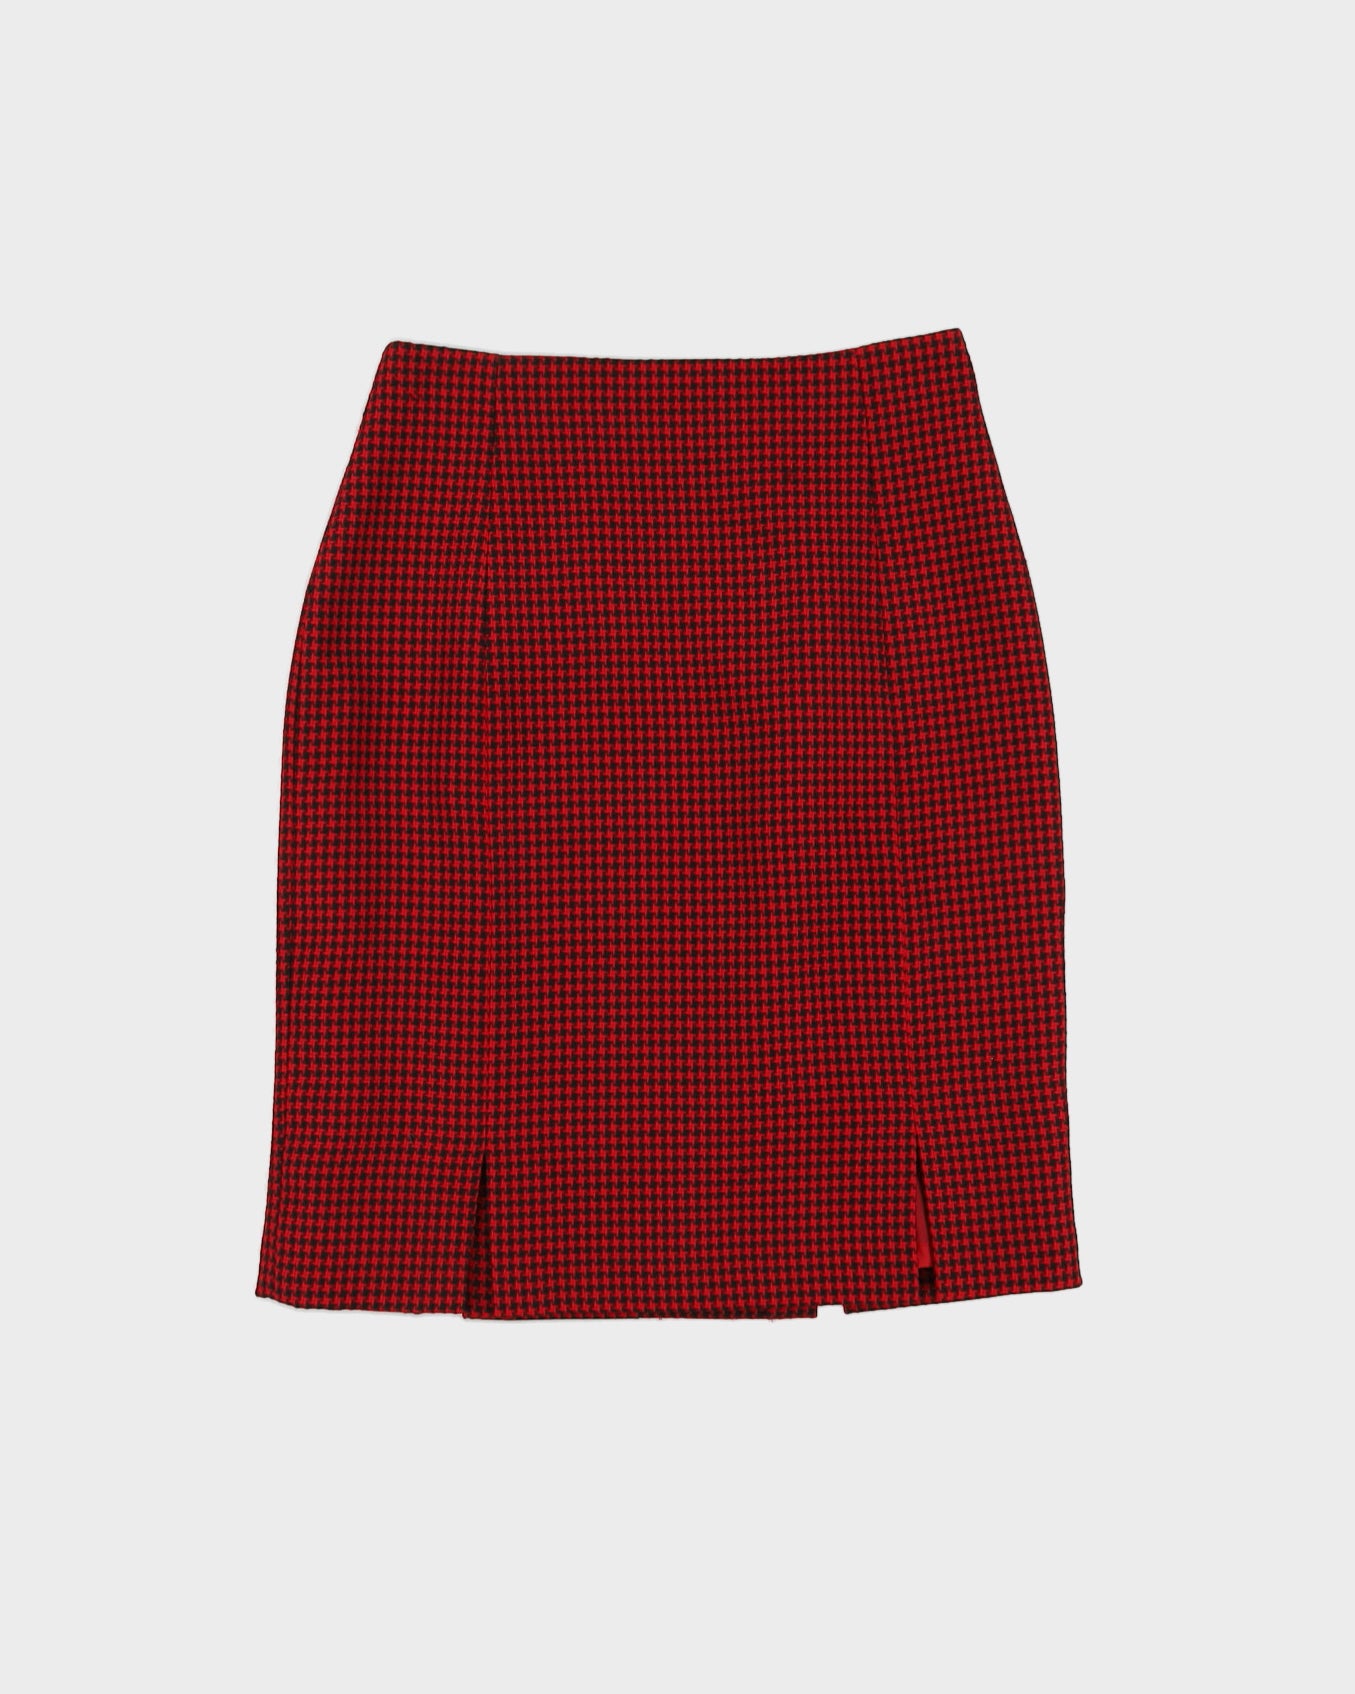 Red And Black Houndstooth  2 Piece Suit - S